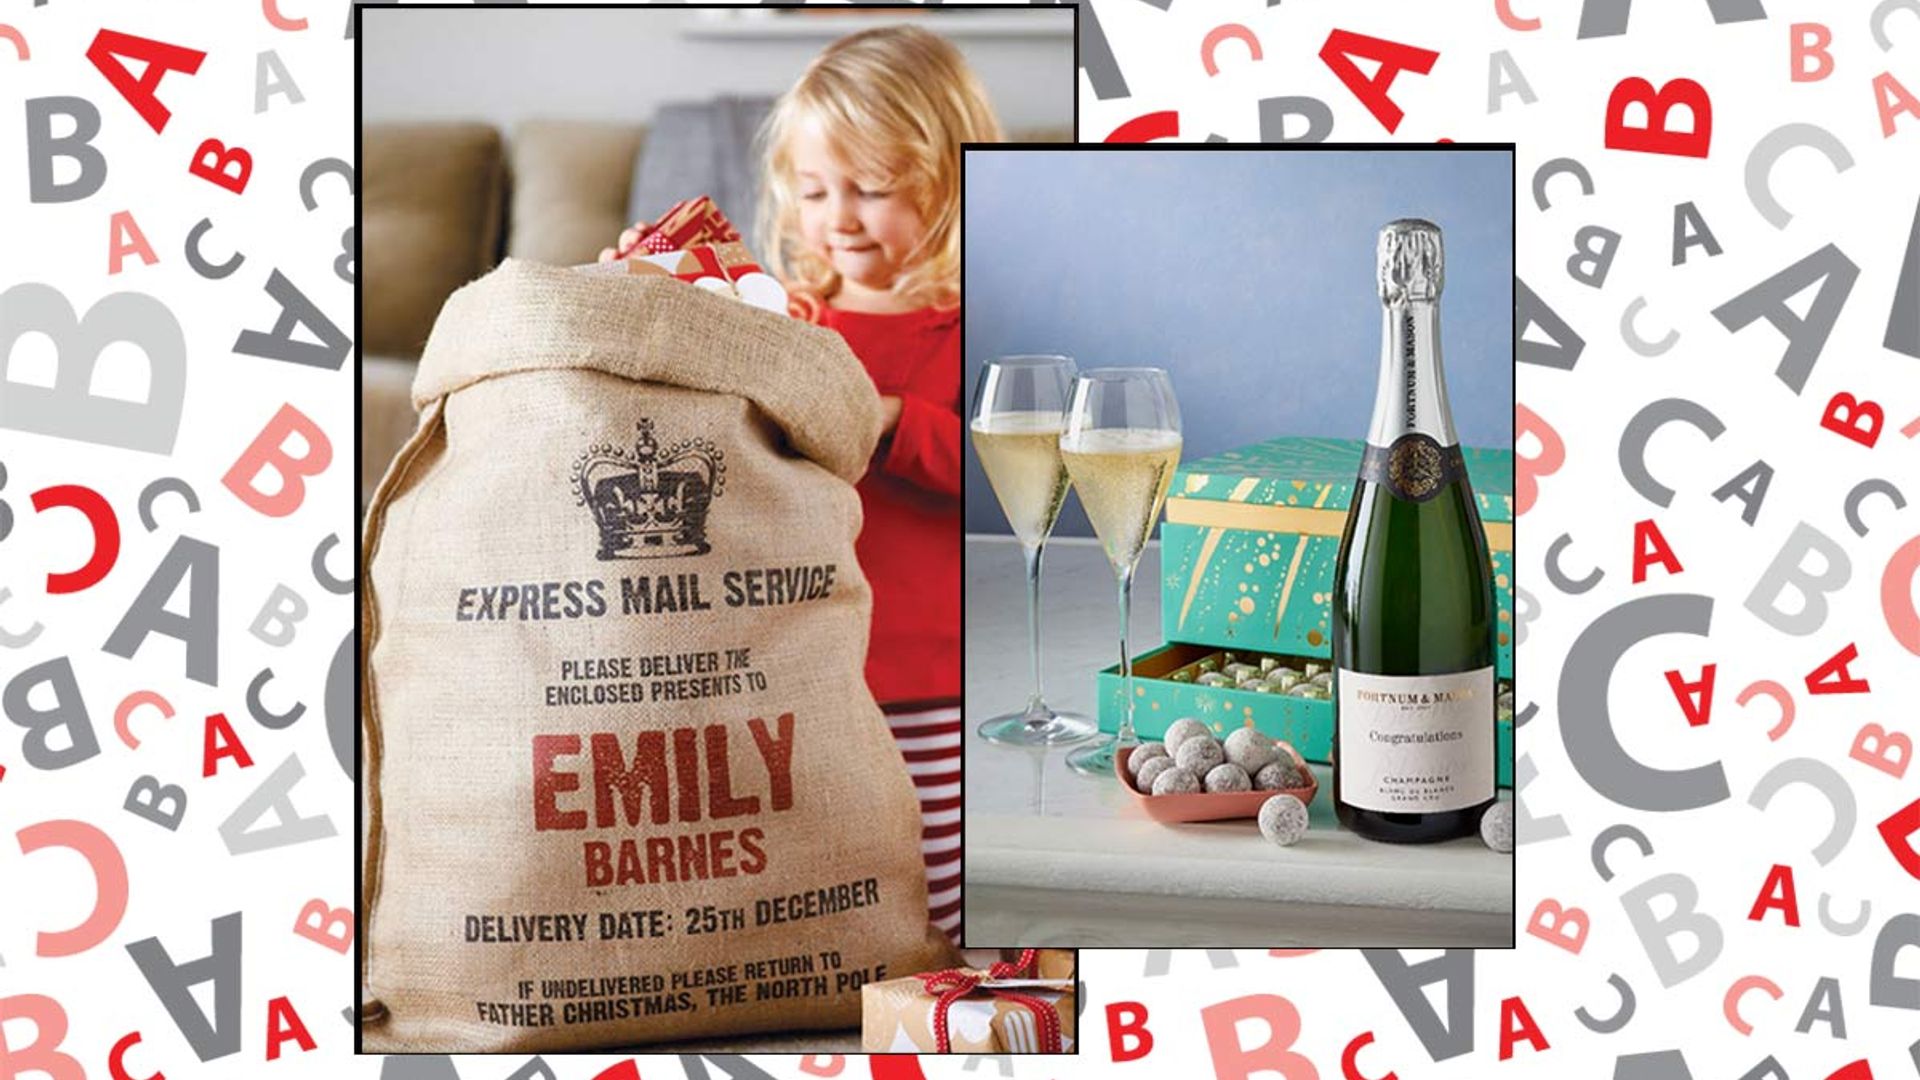 23 best personalised gift ideas because you just can't beat a gift with your name on it